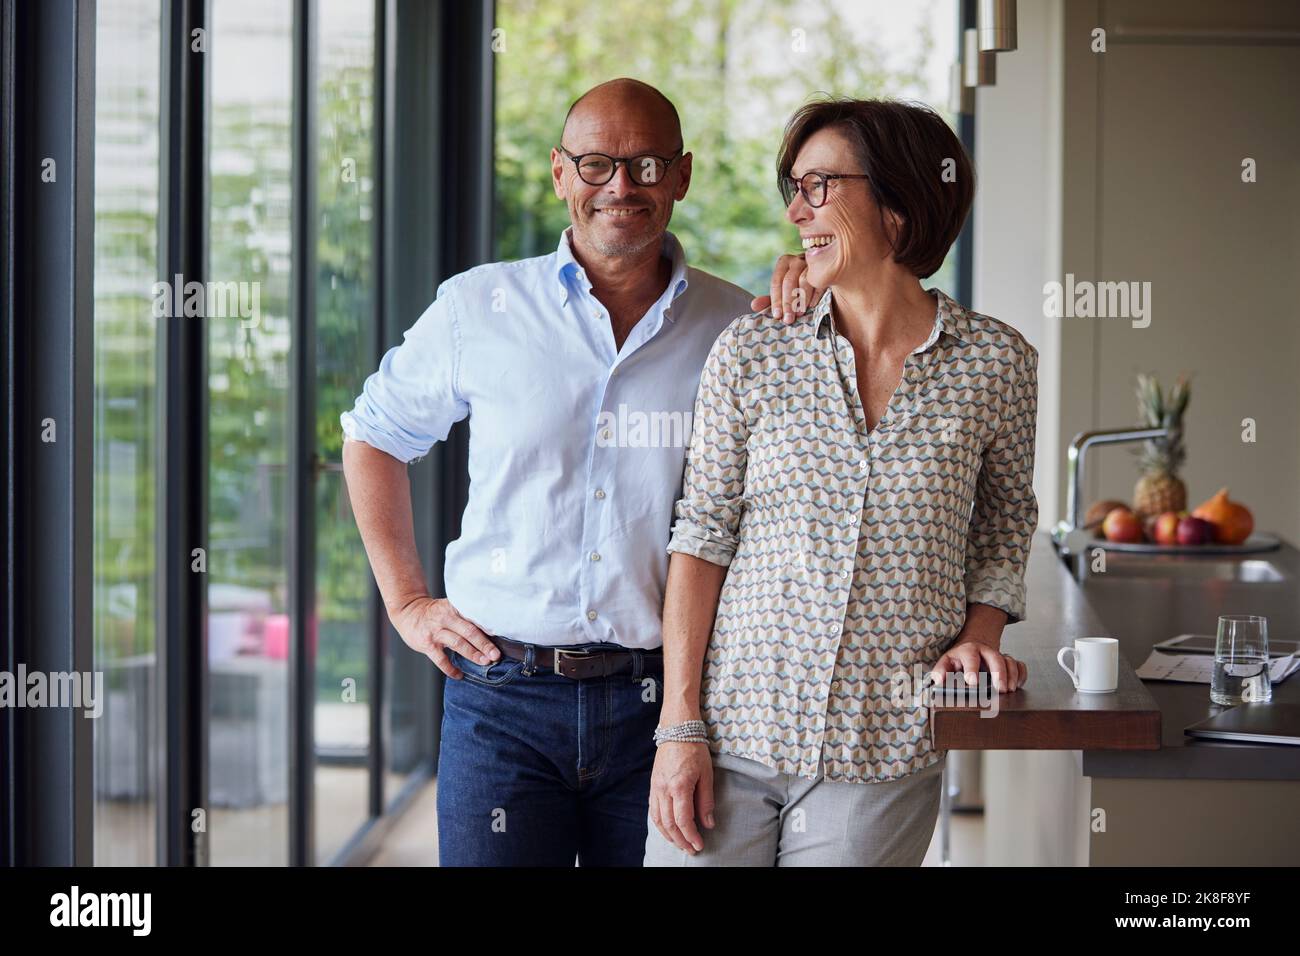 Cheerful woman with man standing by kitchen island Stock Photo